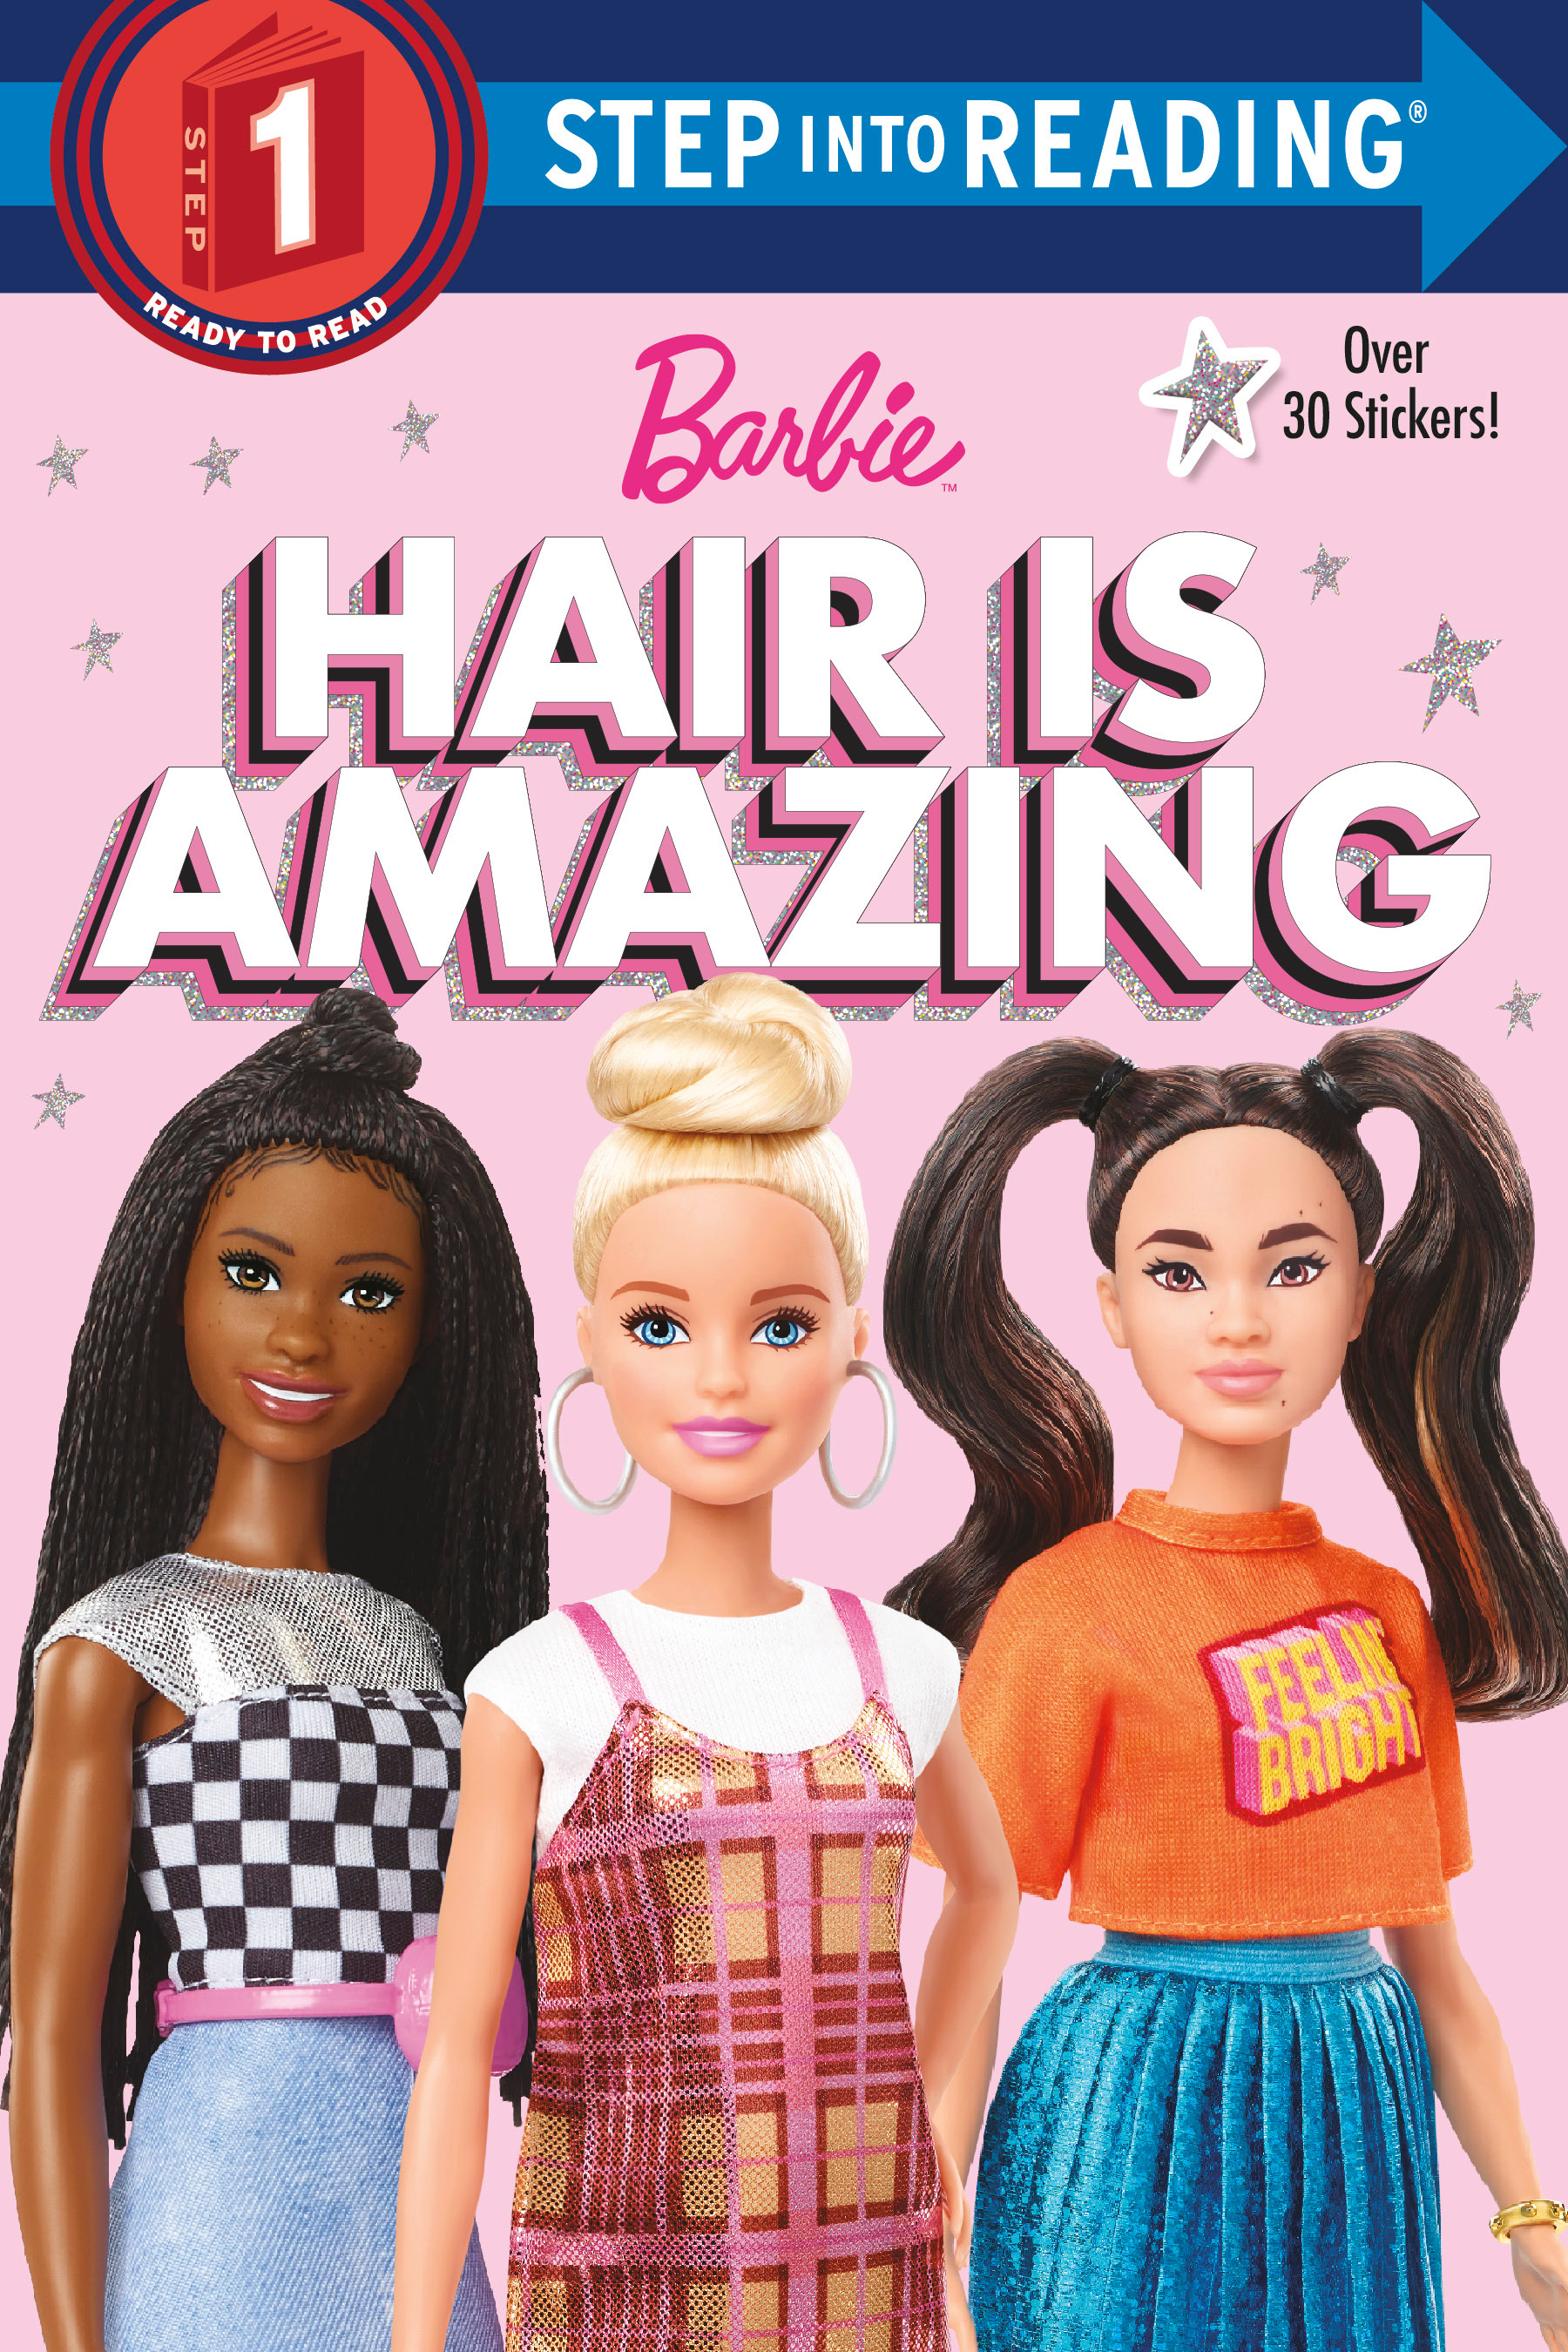 Step Into Reading - Hair is Amazing (Barbie) : A Book About Diversity | 